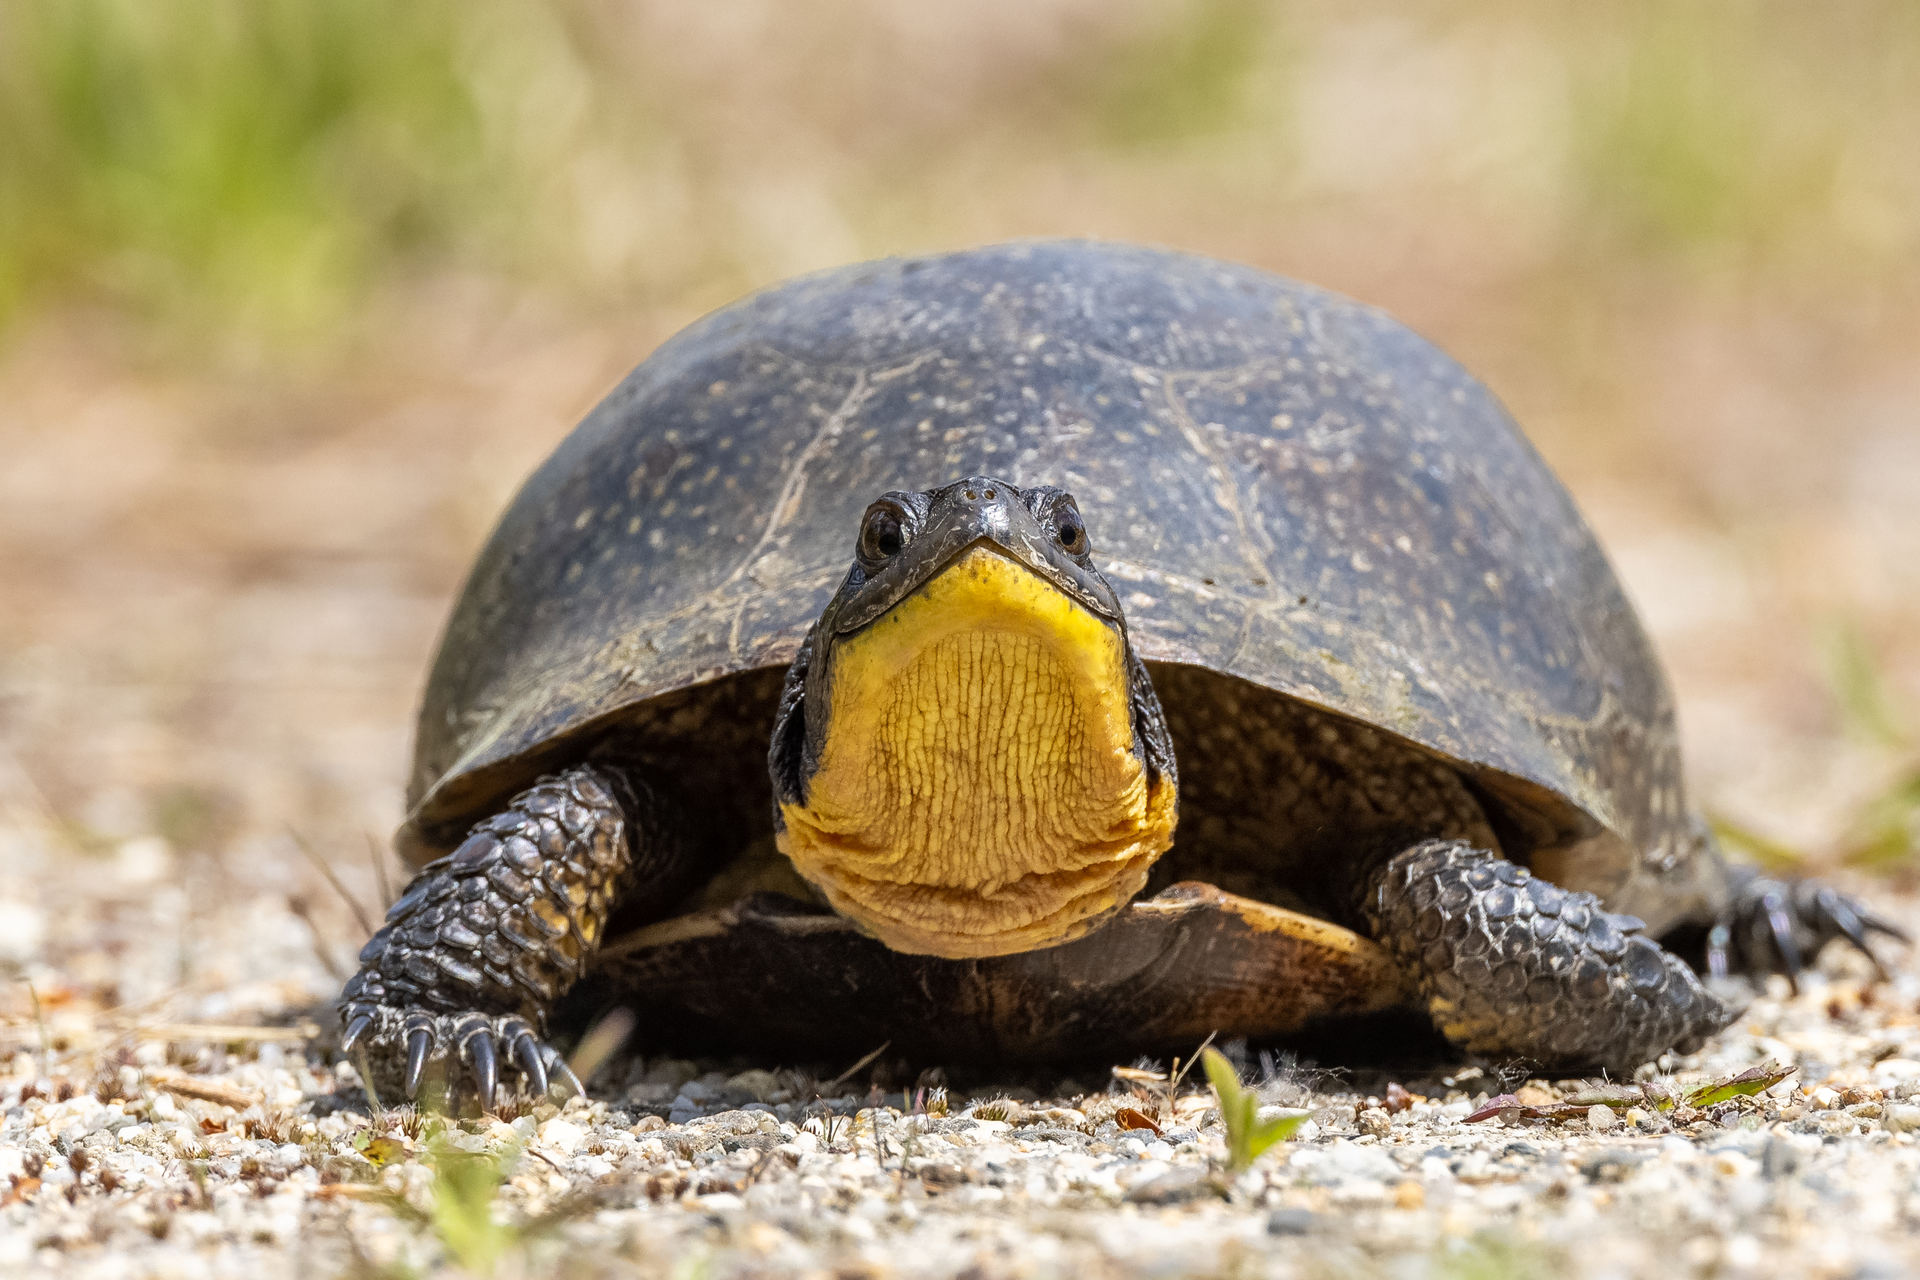 Turtle with a bright yellow neck staring at the camera.